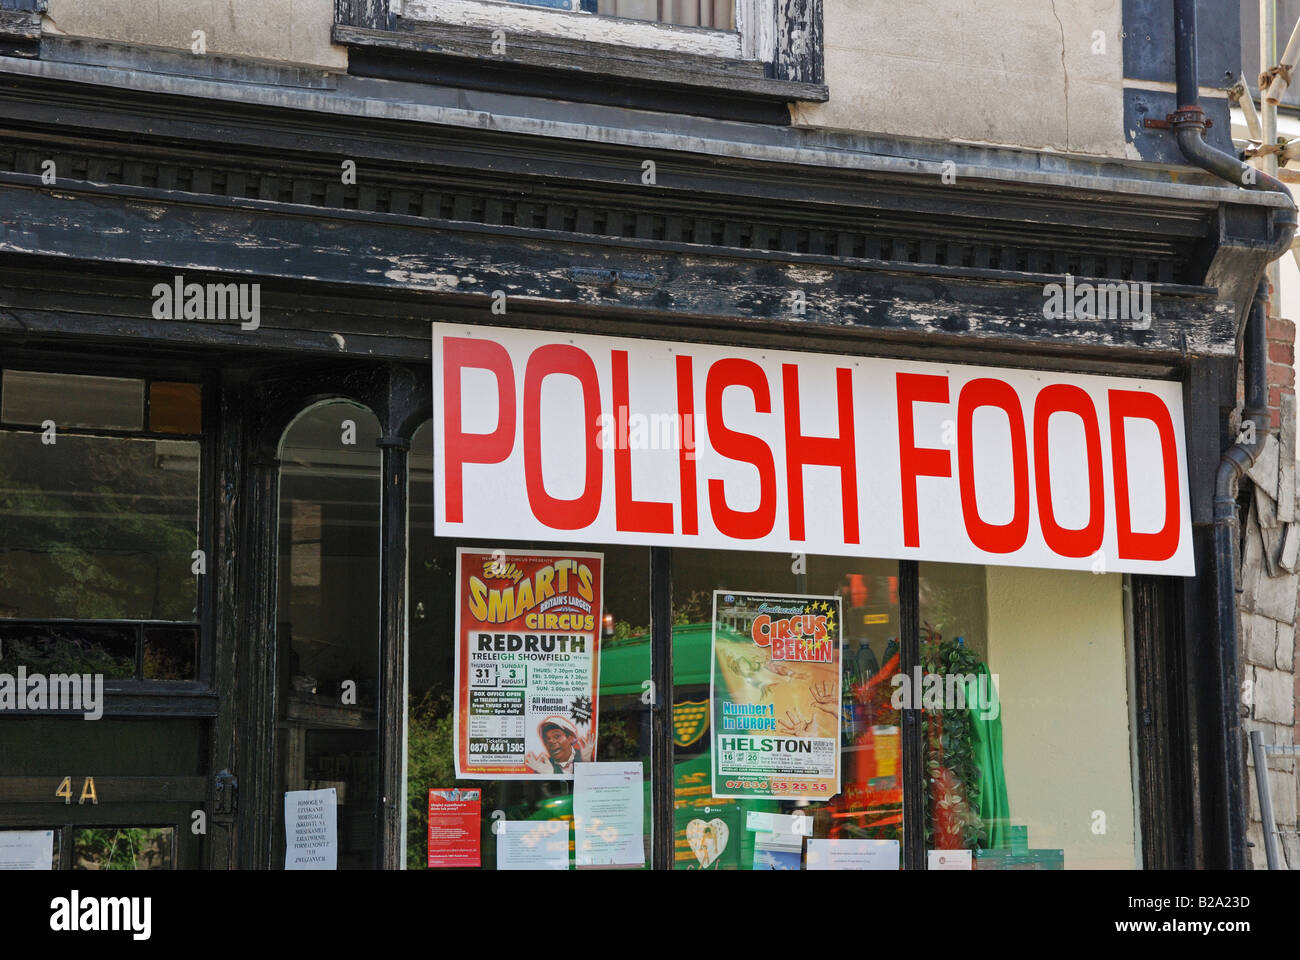 a corner shop in redruth,cornwall,uk now selling polish food the local eastern european community Stock Photo